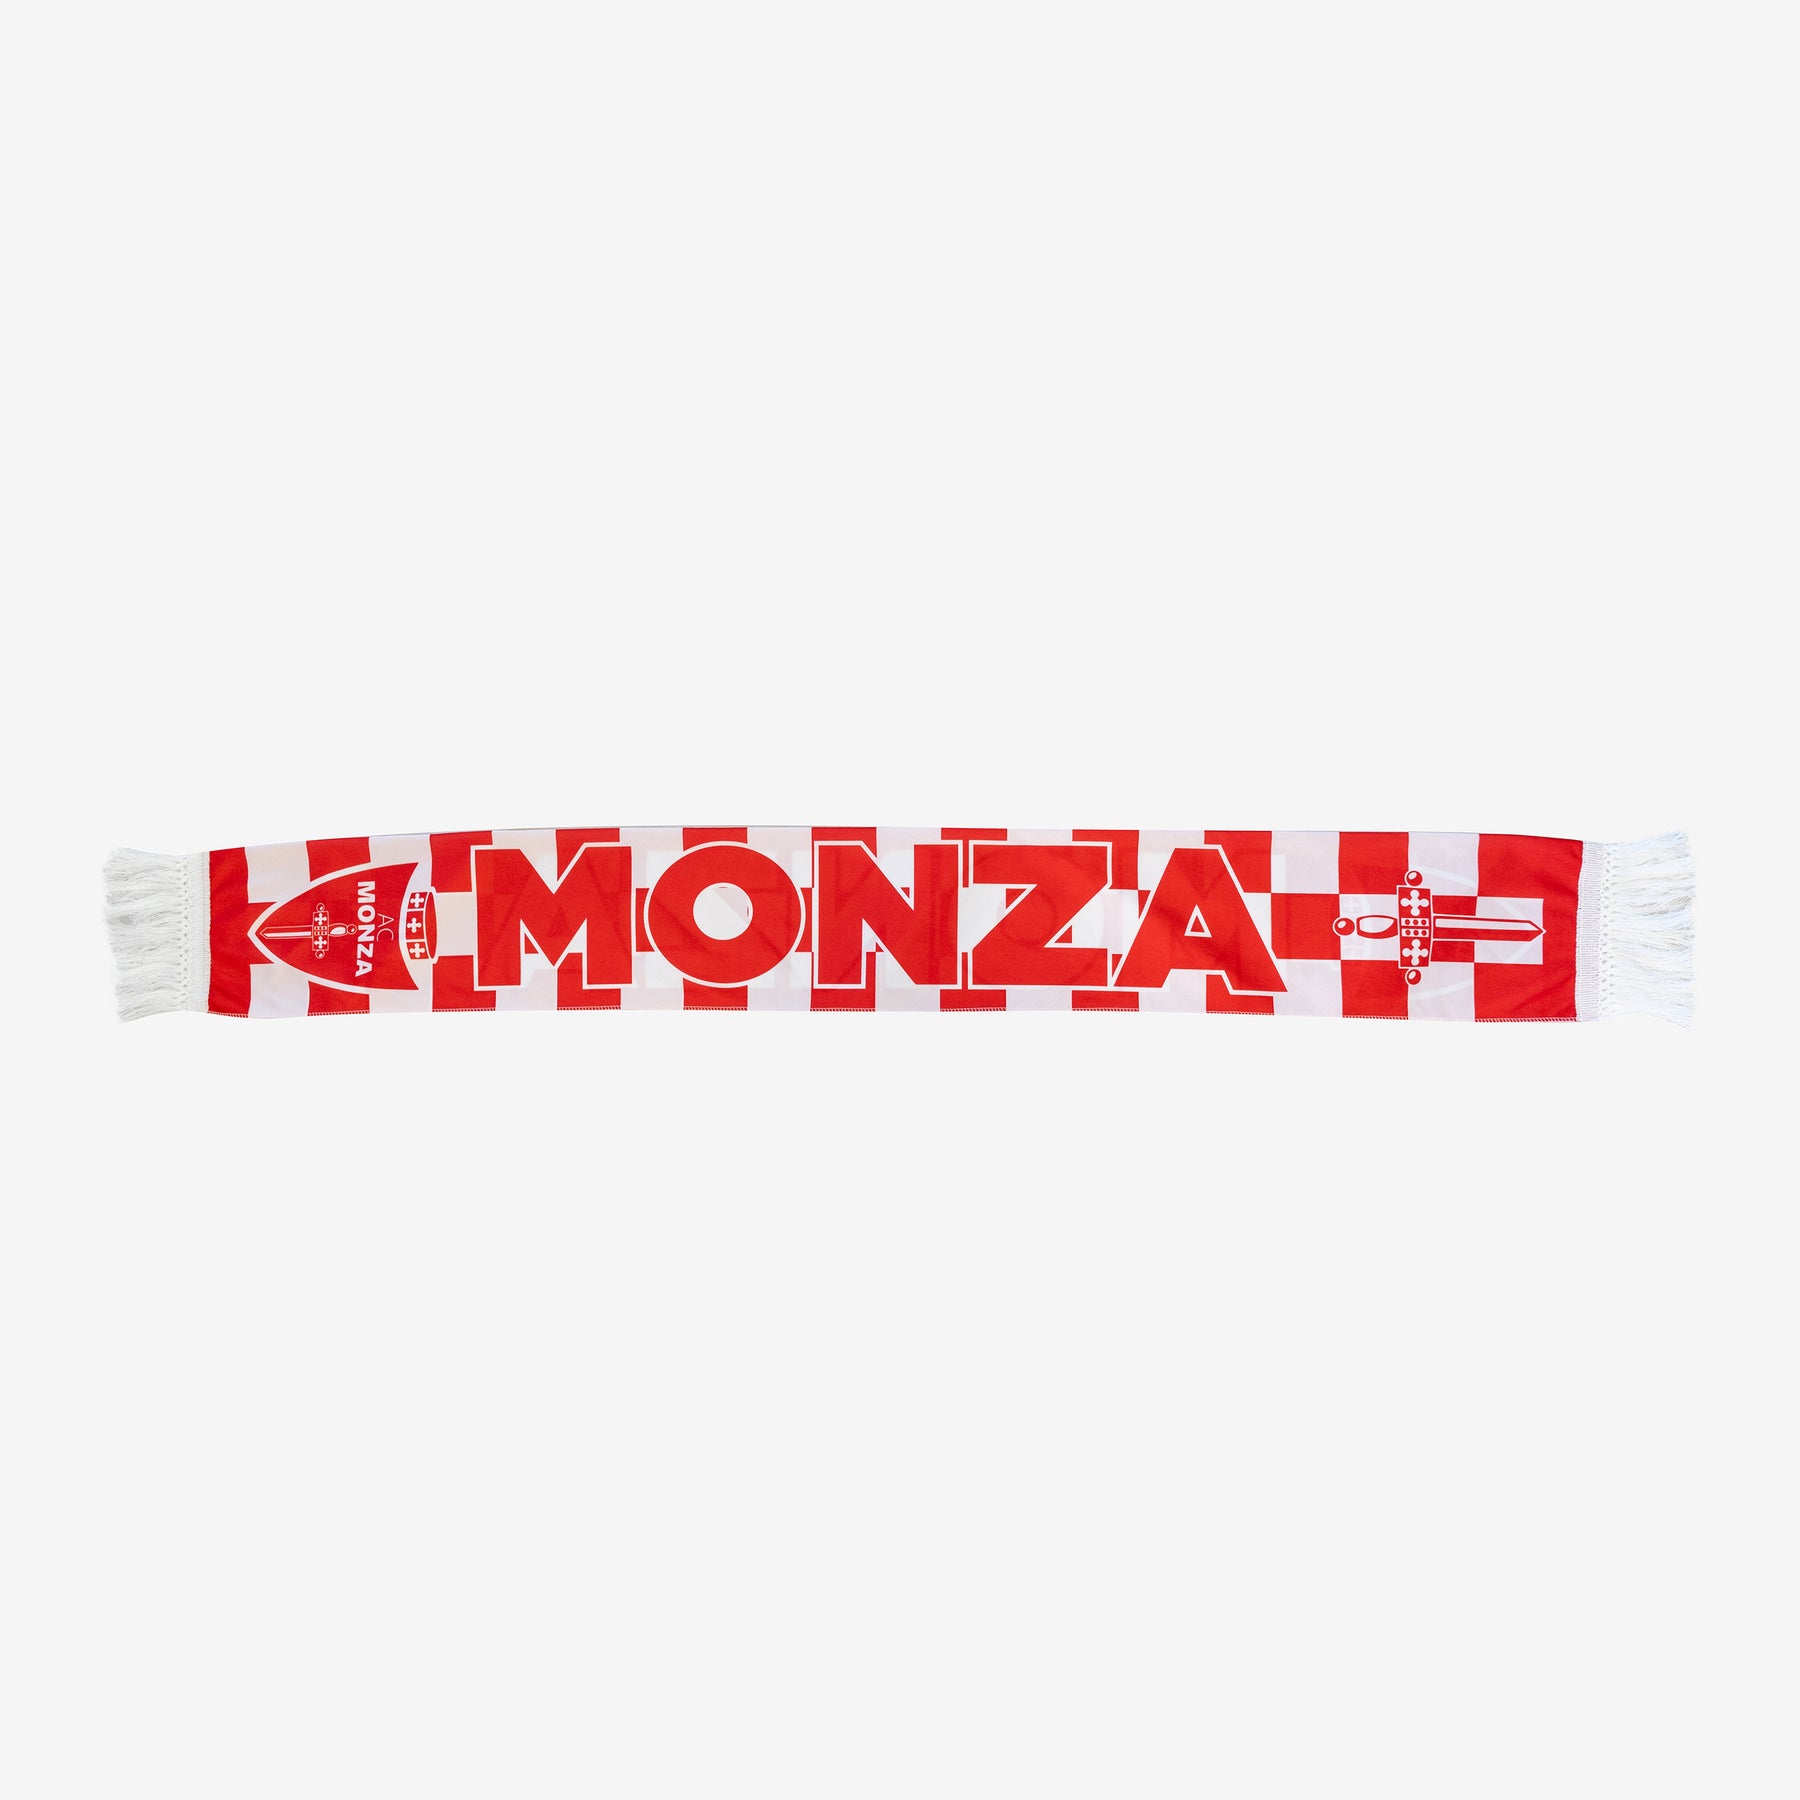 Ac Monza Official Poly Scarf 02 Chess Version Ac Monza Shop